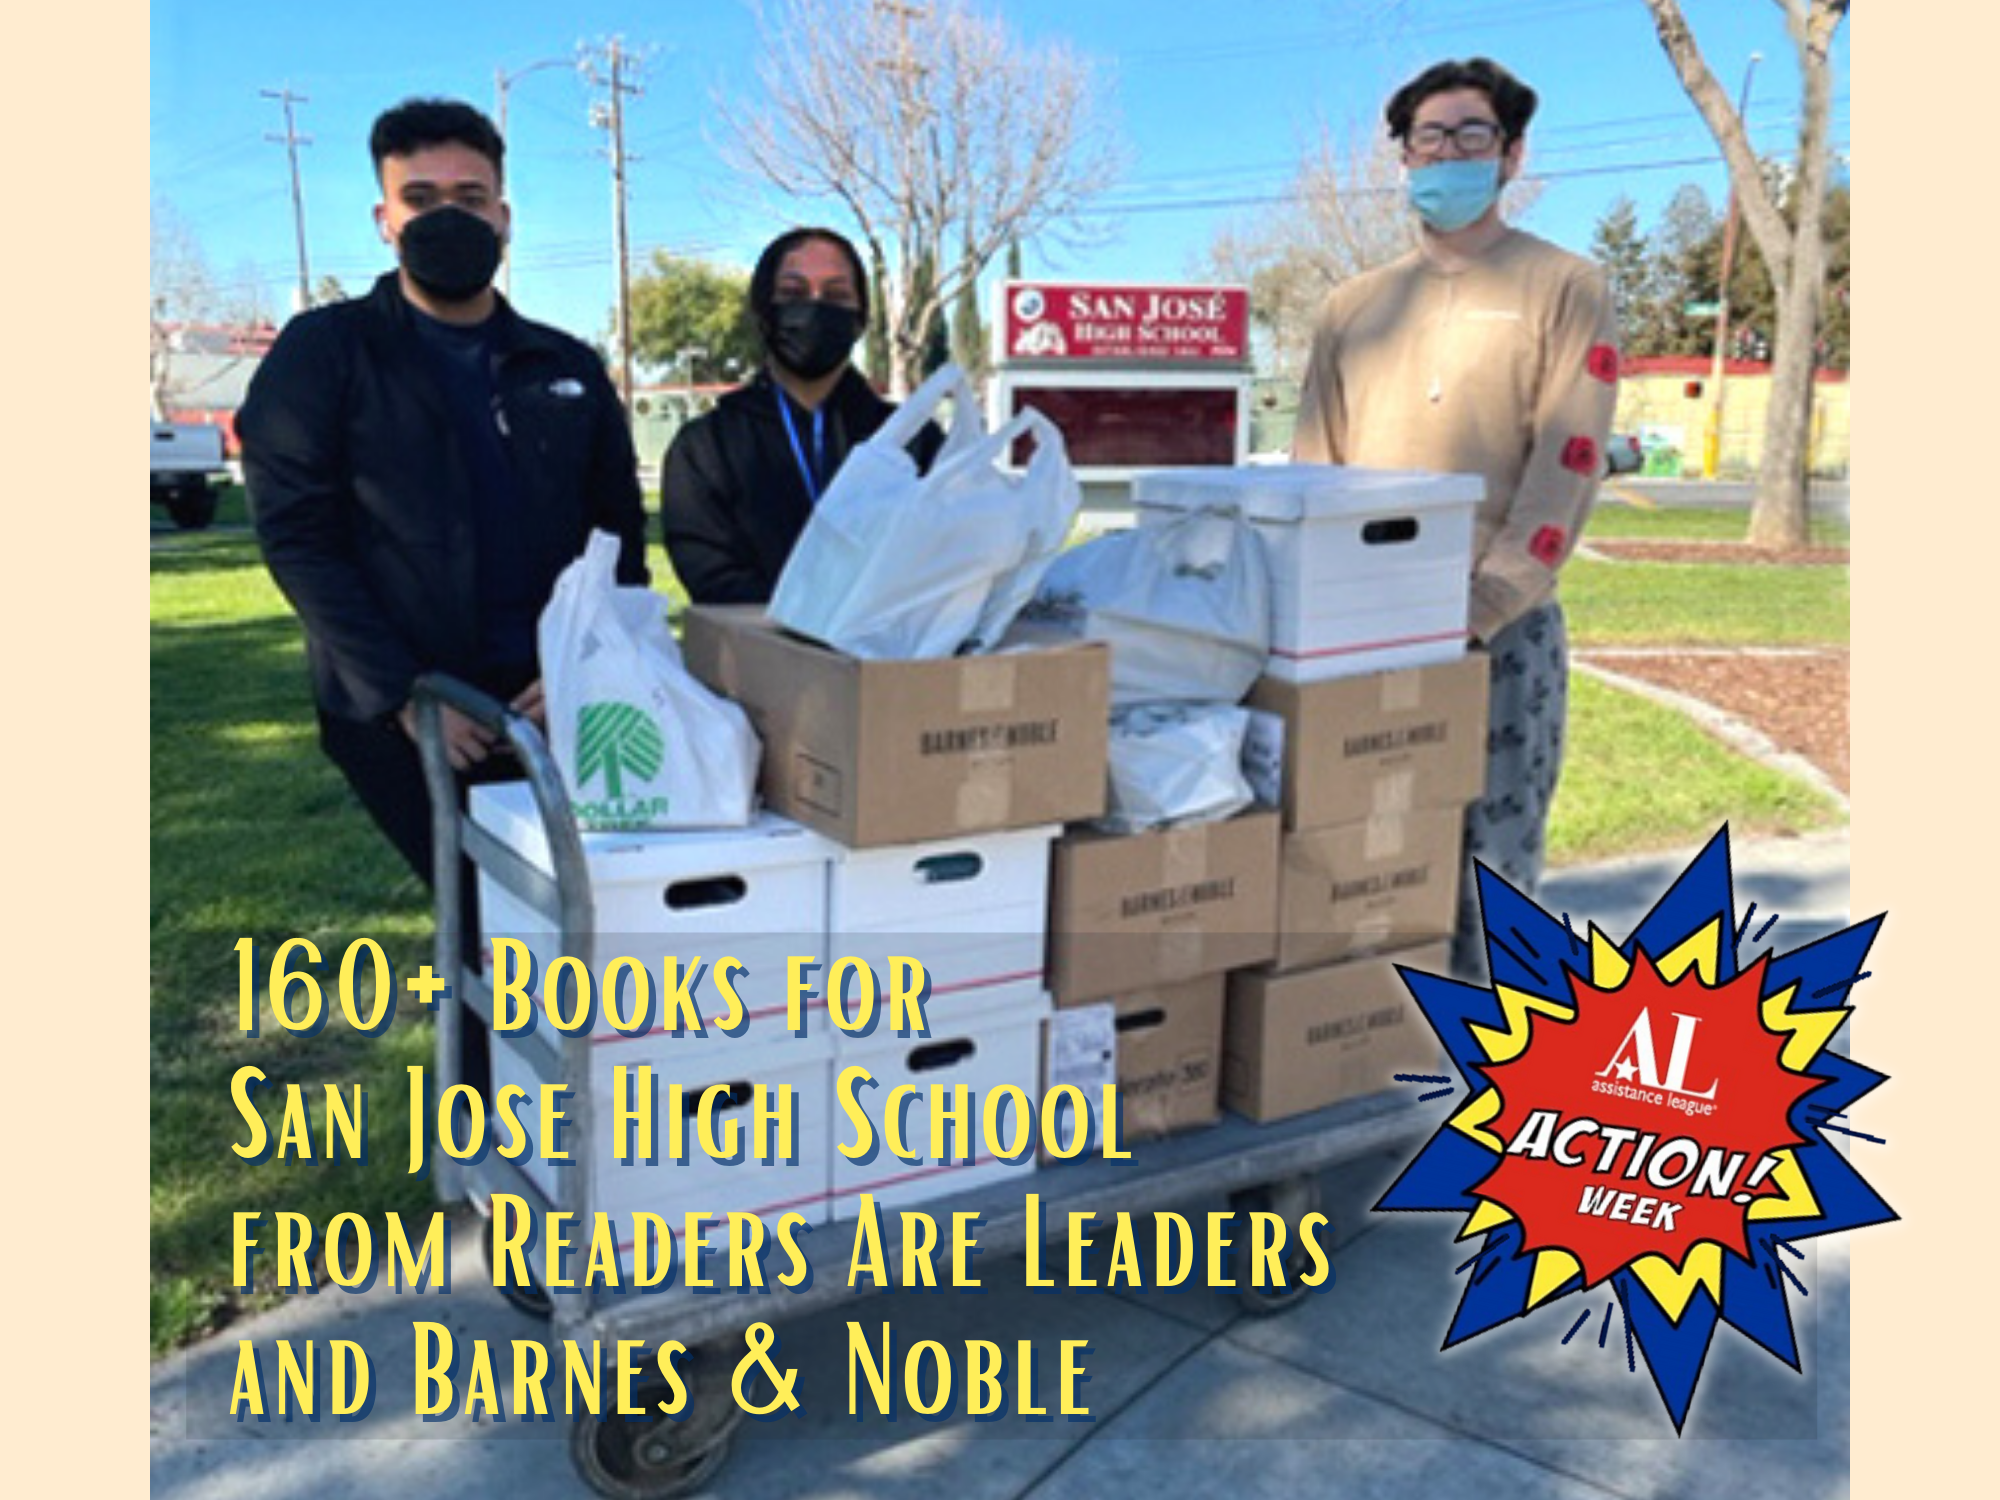 Students accepting 160+ books from Readers Are Leaders and Barnes & Noble